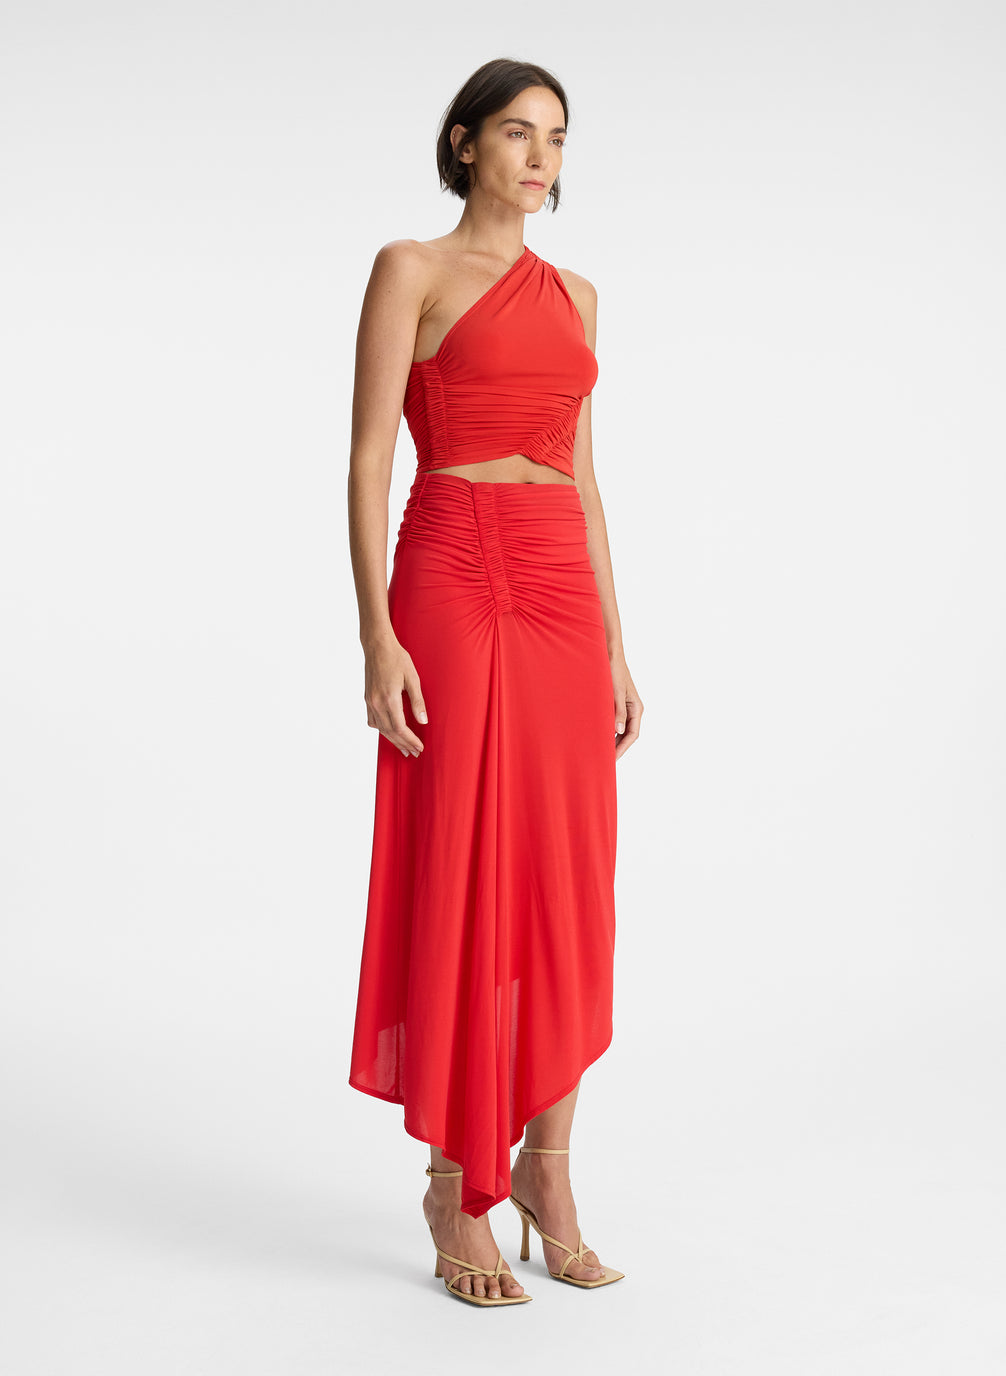 side view of woman wearing red one shoulder top and matching red skirt